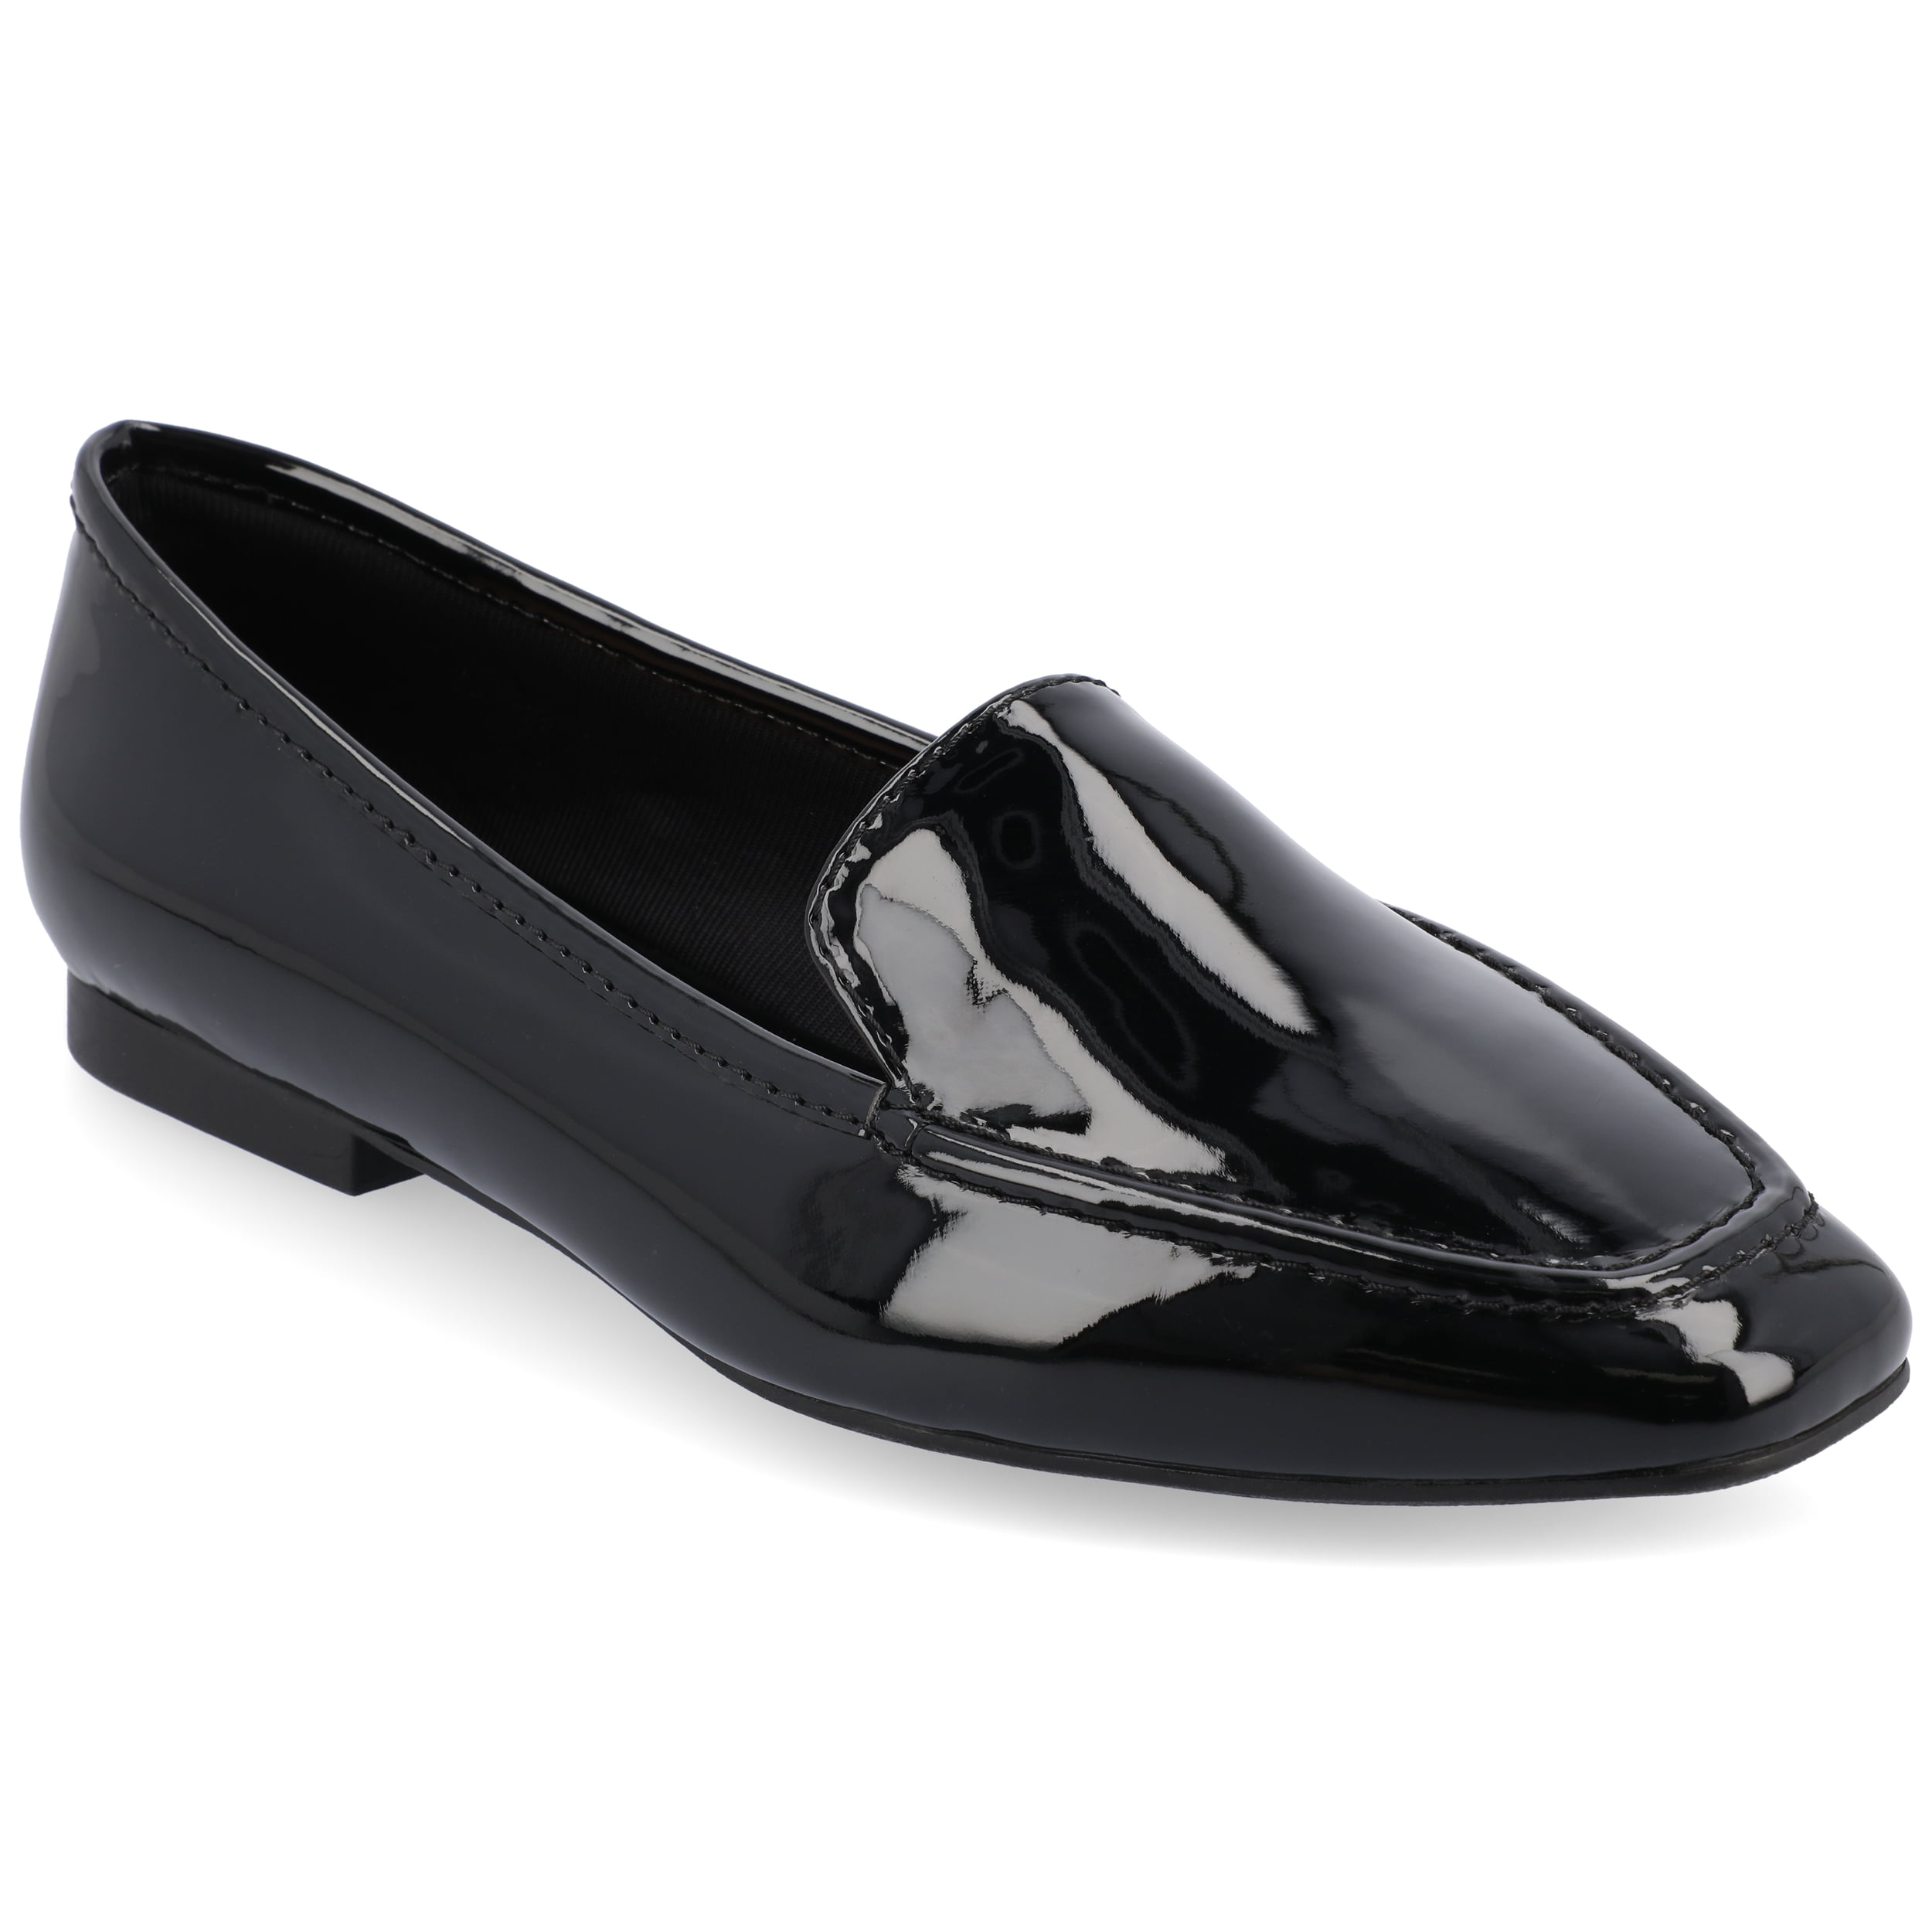 Journee Collection Womens Tullie Slip On Square Toe Loafer Flats ...